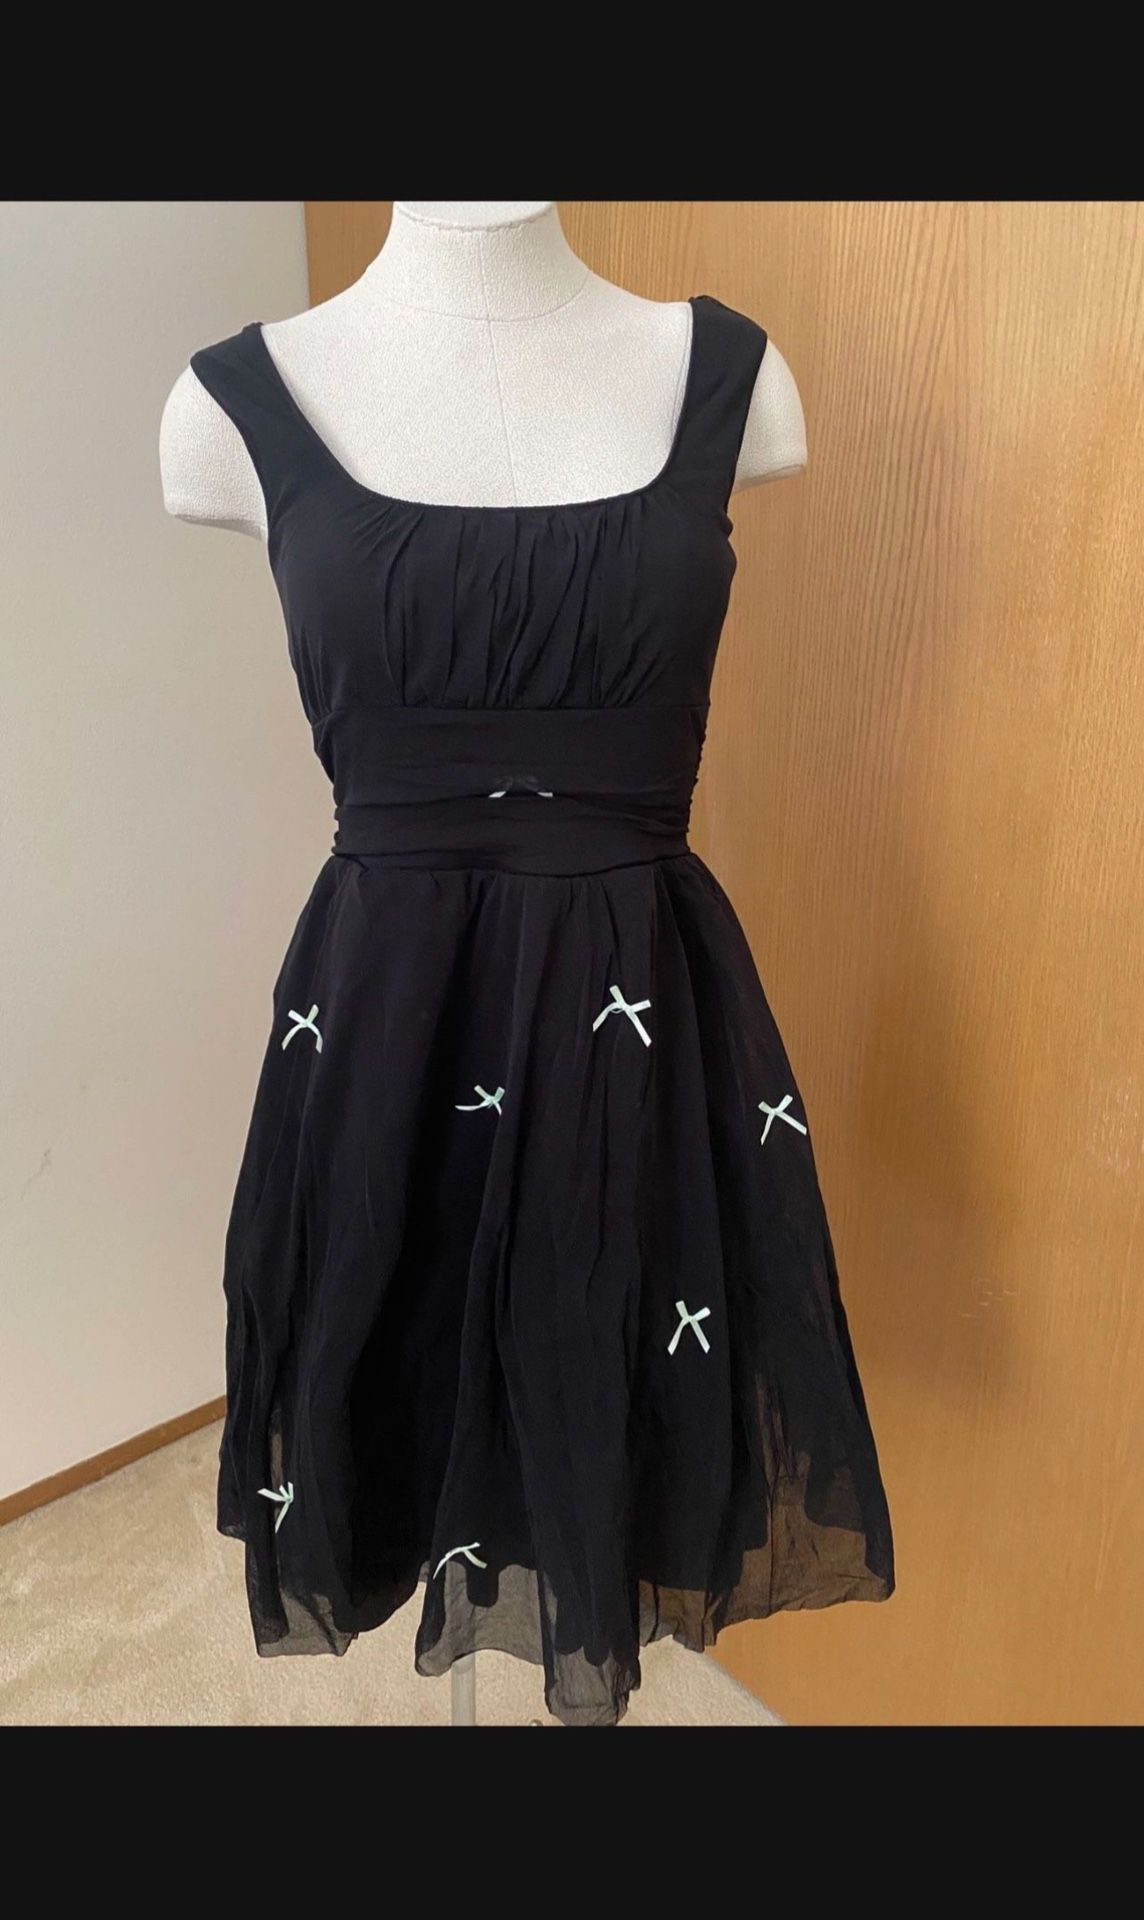 Party Dress Brand New